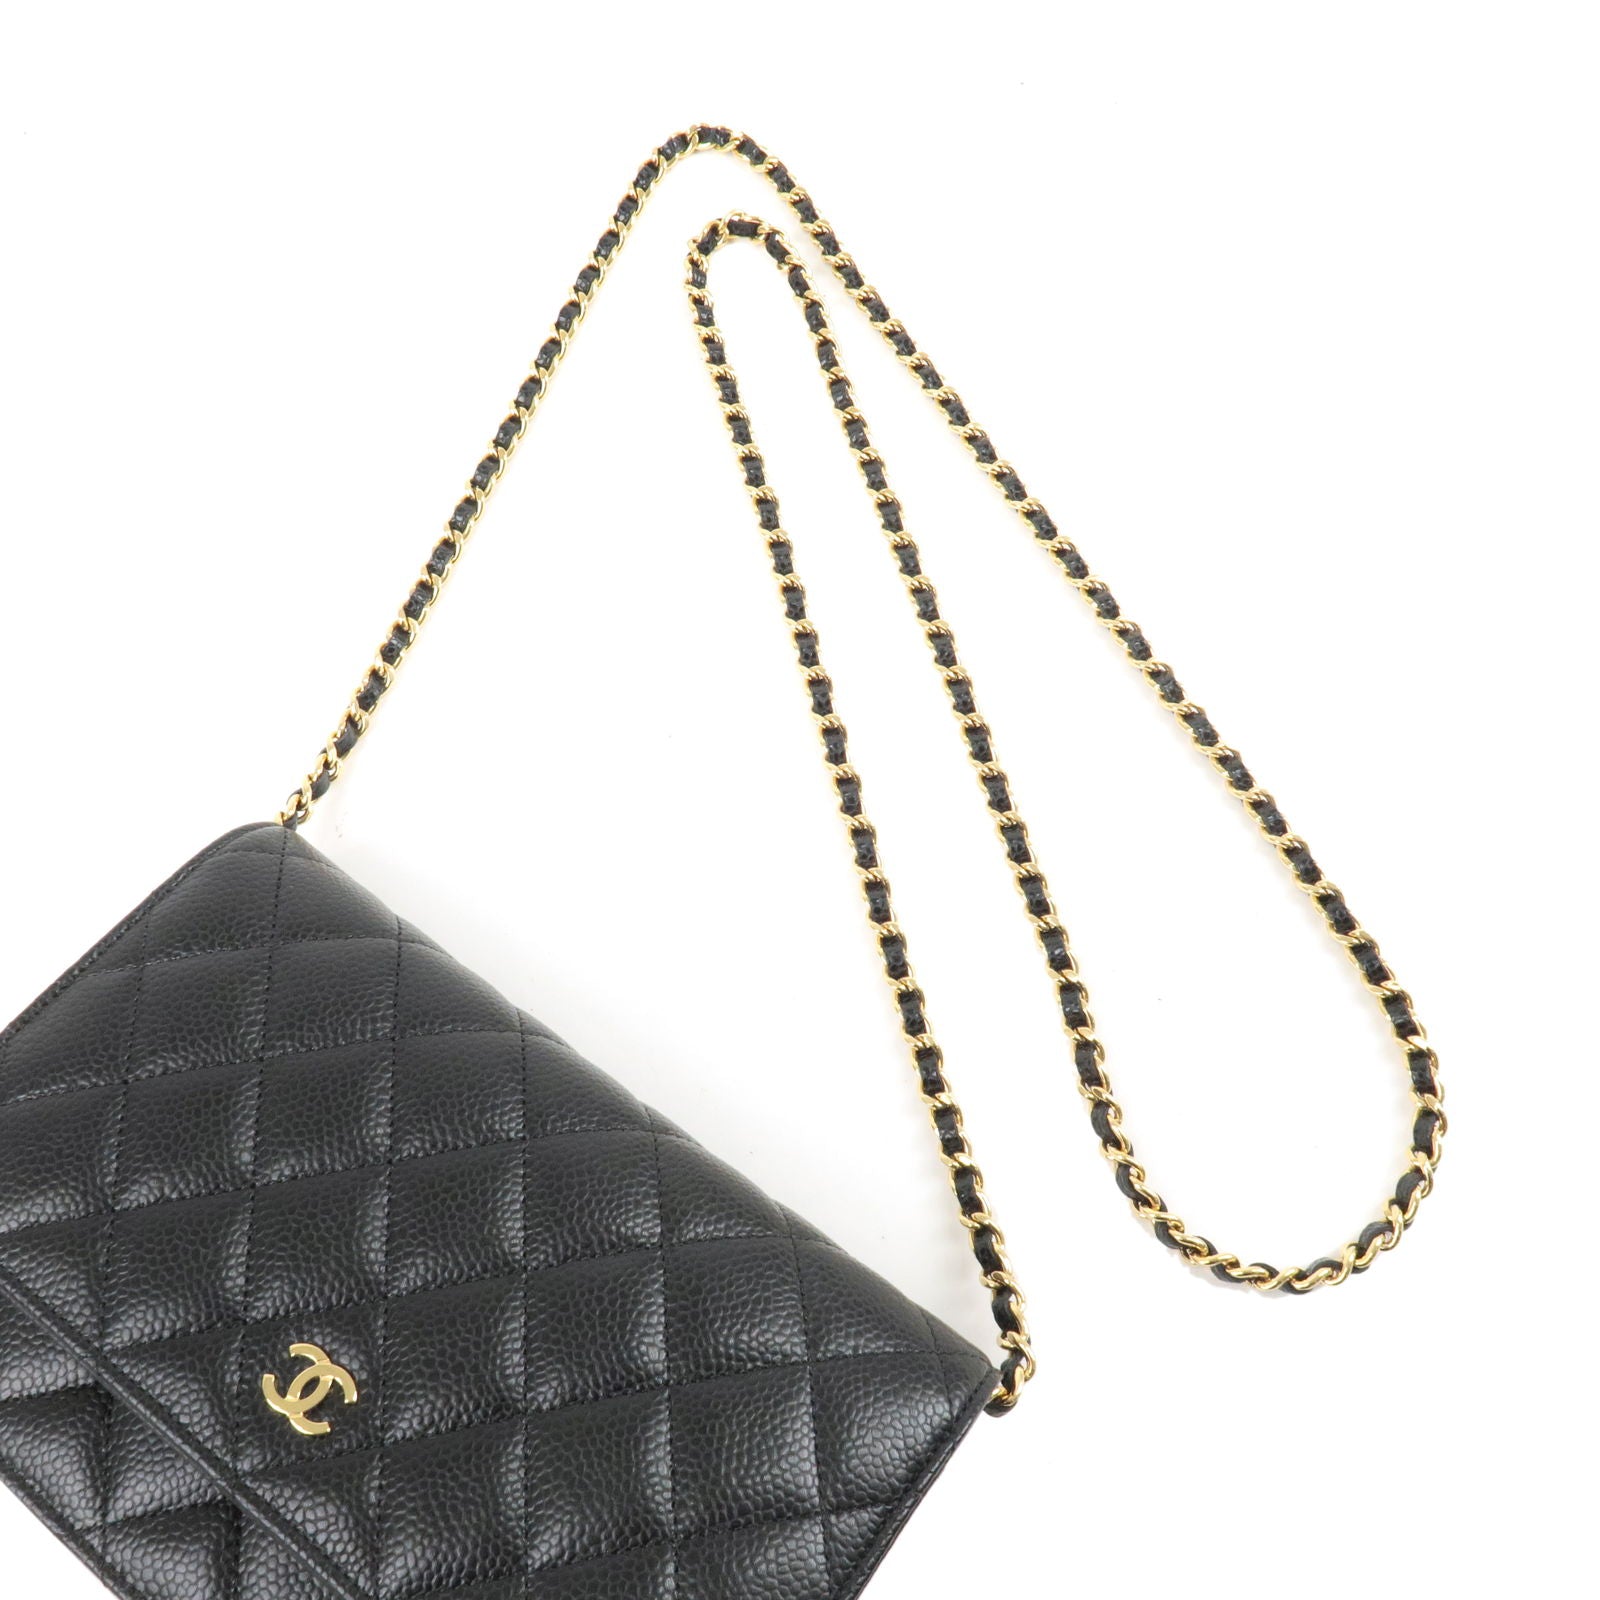 chanel wallet on chain bag new